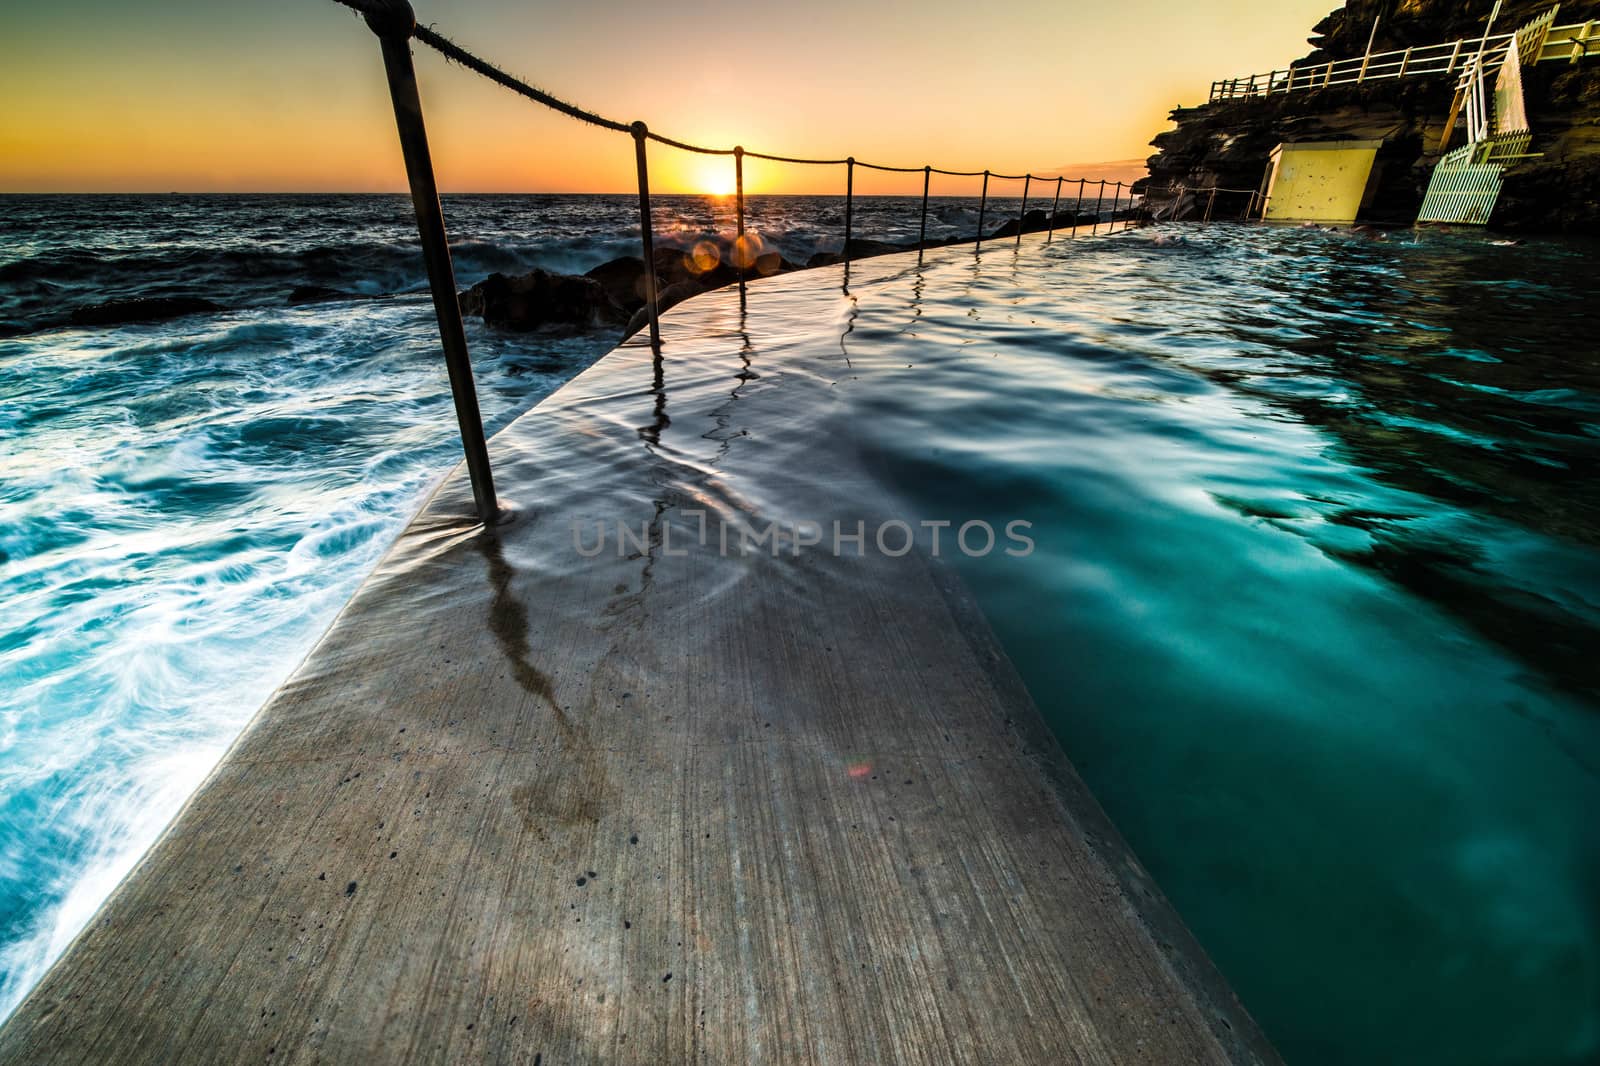 Bronte Pool, Sydney at sunrise with the orb of the sun just appearing over the horizon lighting up the rock pool as it juts out into the ocean with surf cascading over the wall